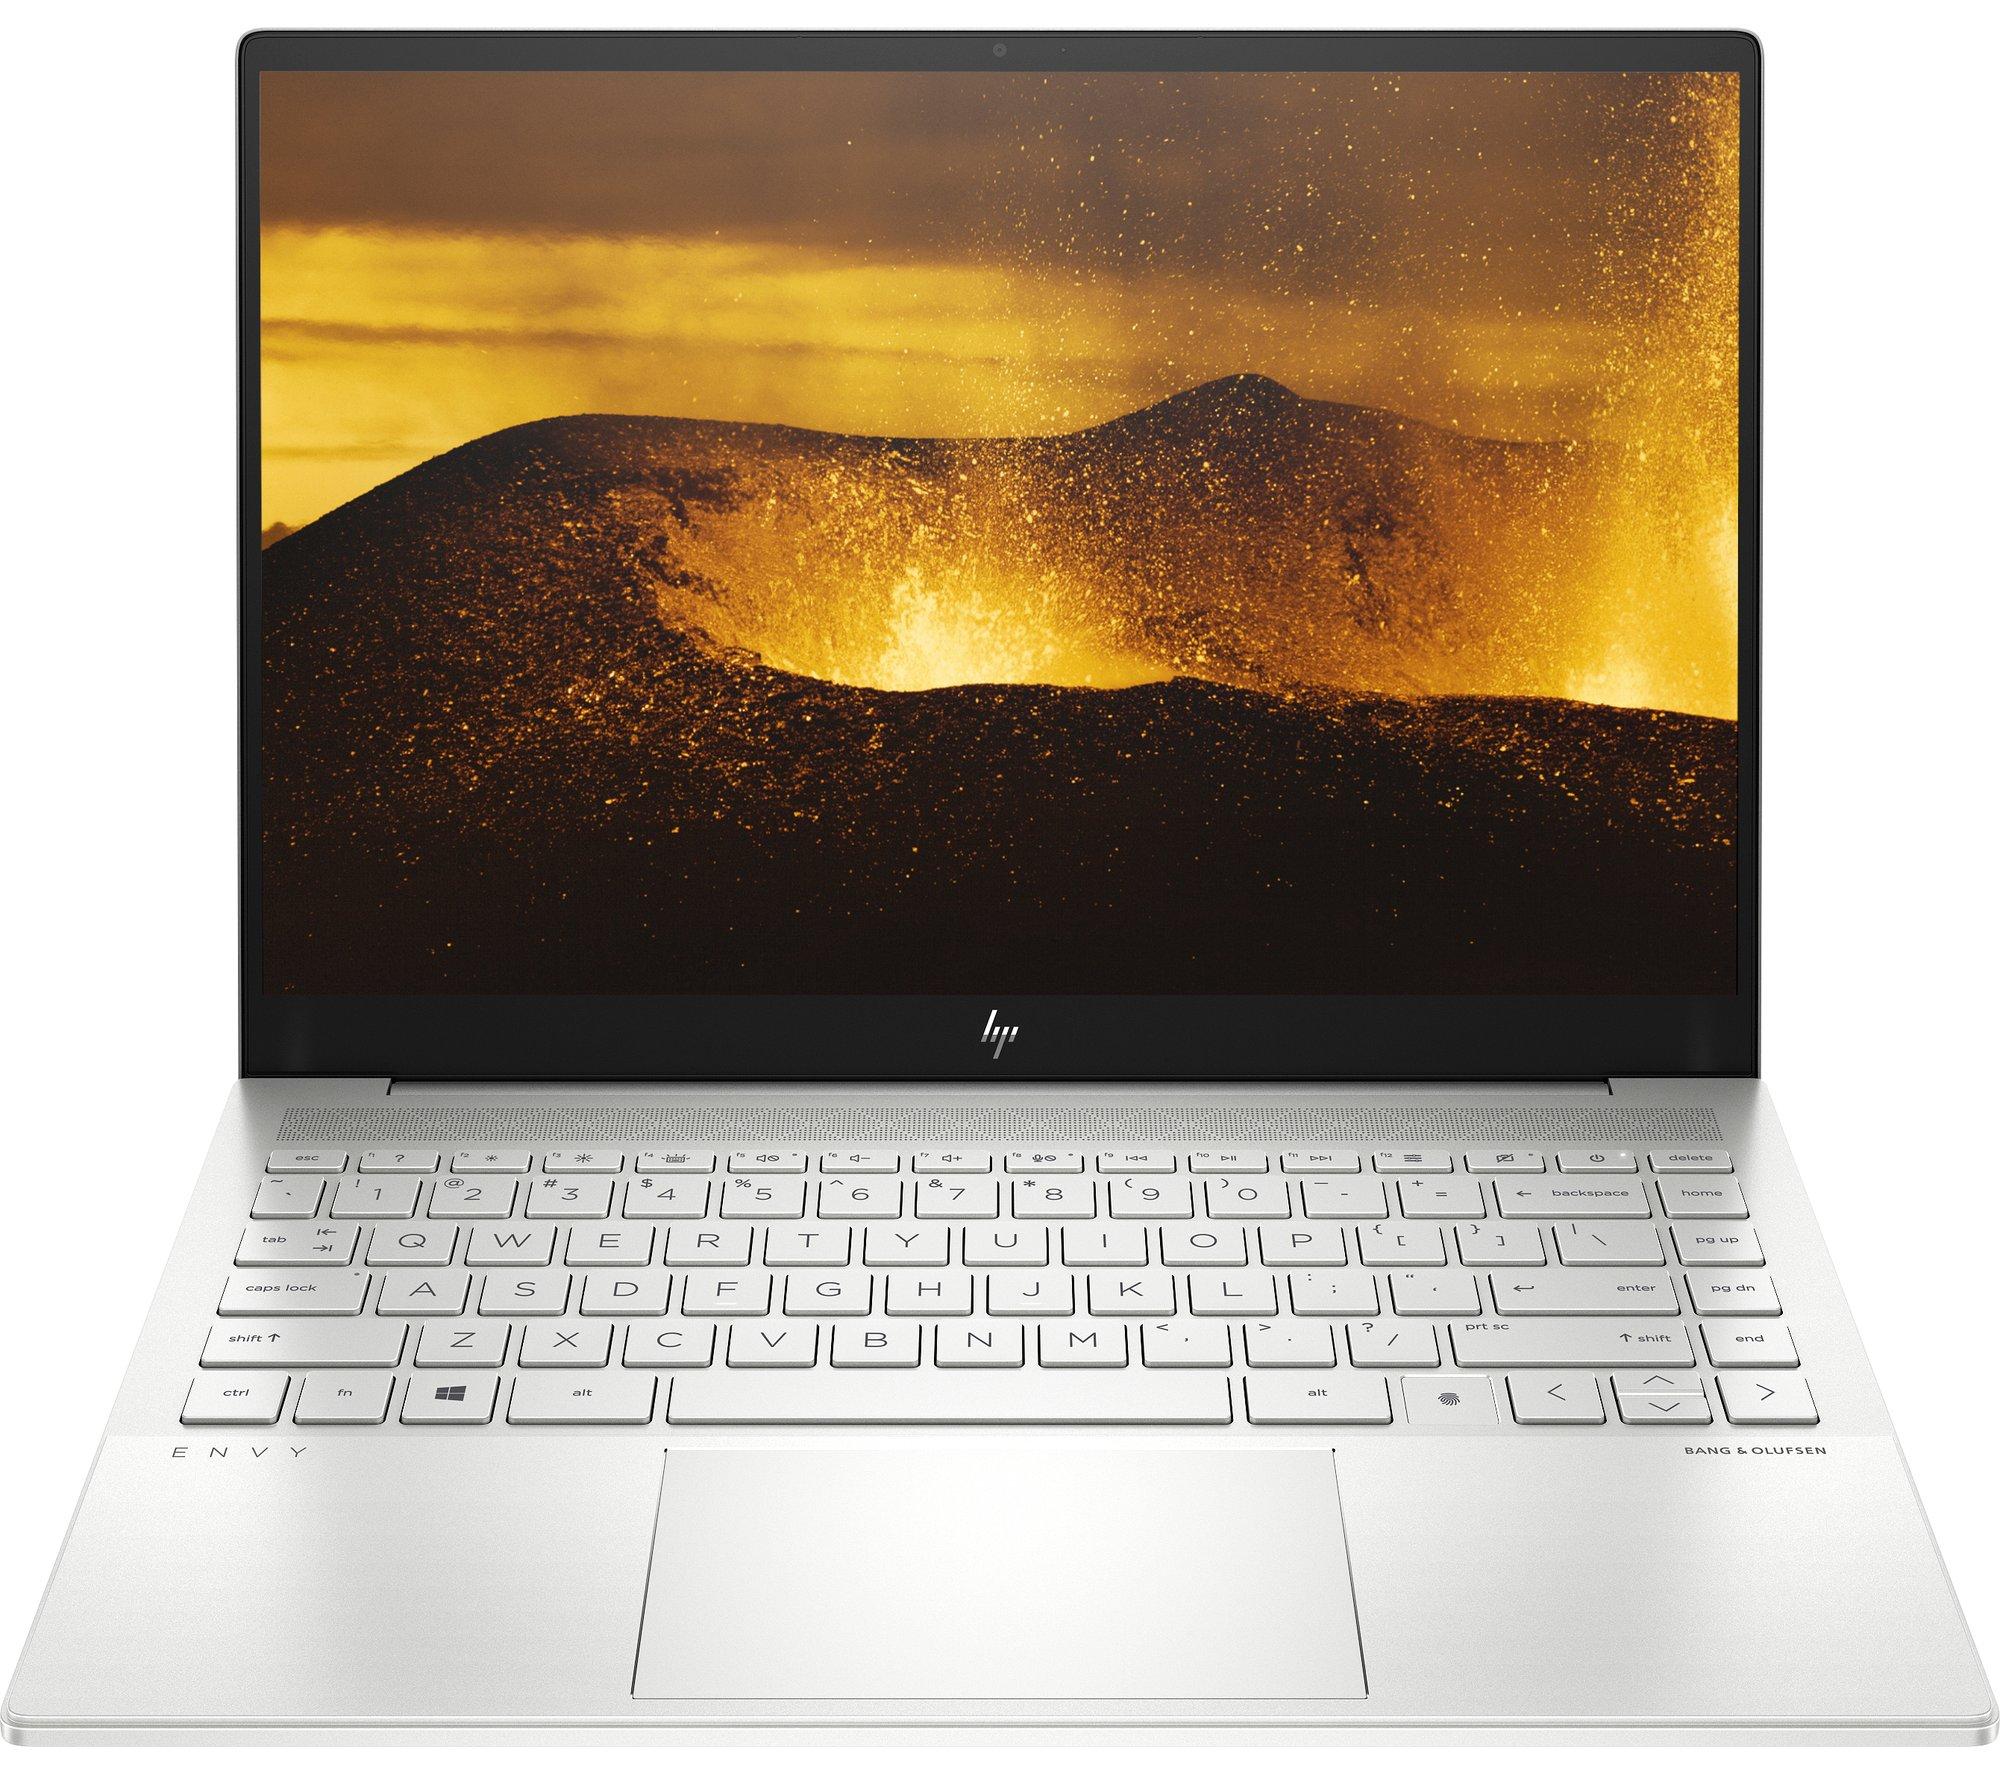 £949, HP ENVY 14-eb0505na 14inch Laptop - Intel® Core™ i5, 512 GB SSD, Silver, Windows 11, Intel® Core™ i5-11300H Processor, RAM: 16 GB / Storage: 512 GB SSD, Full HD touchscreen, Battery life: Up to 16 hours, 